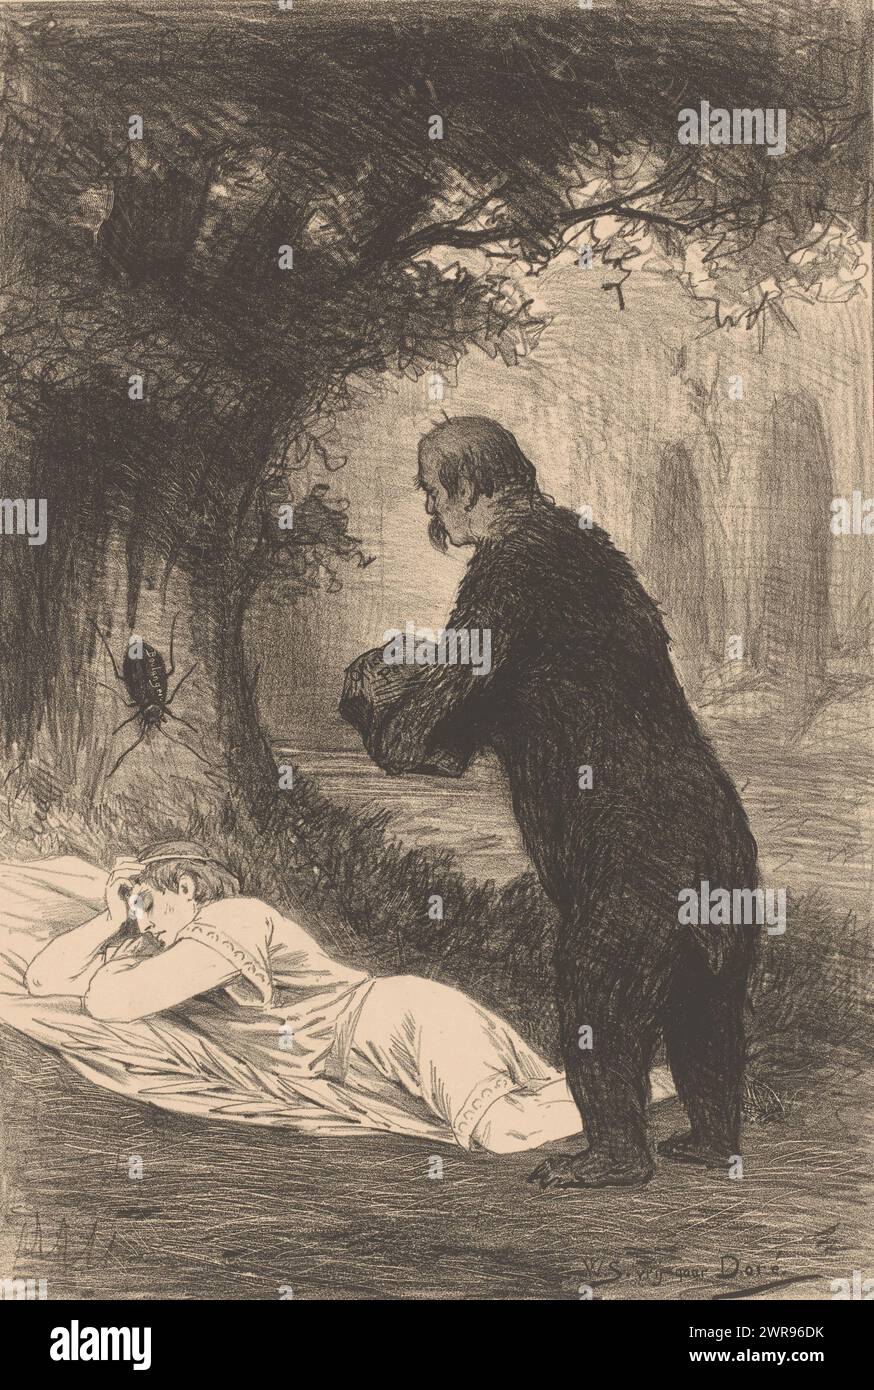 Cartoon on the Schnaebelé affair, a young man personifying peace is sleeping under a tree. An insect named Boulanger crawls down from the tree. On the right is a man in bearskin, possibly Otto von Bismarck, holding a stone with Officieuse Pers written on it, ready to crush the Peace., print maker: Willem Steelink (II), after design by: Gustave Doré, Netherlands, in or before 1887, paper, height 439 mm × width 295 mm, print Stock Photo